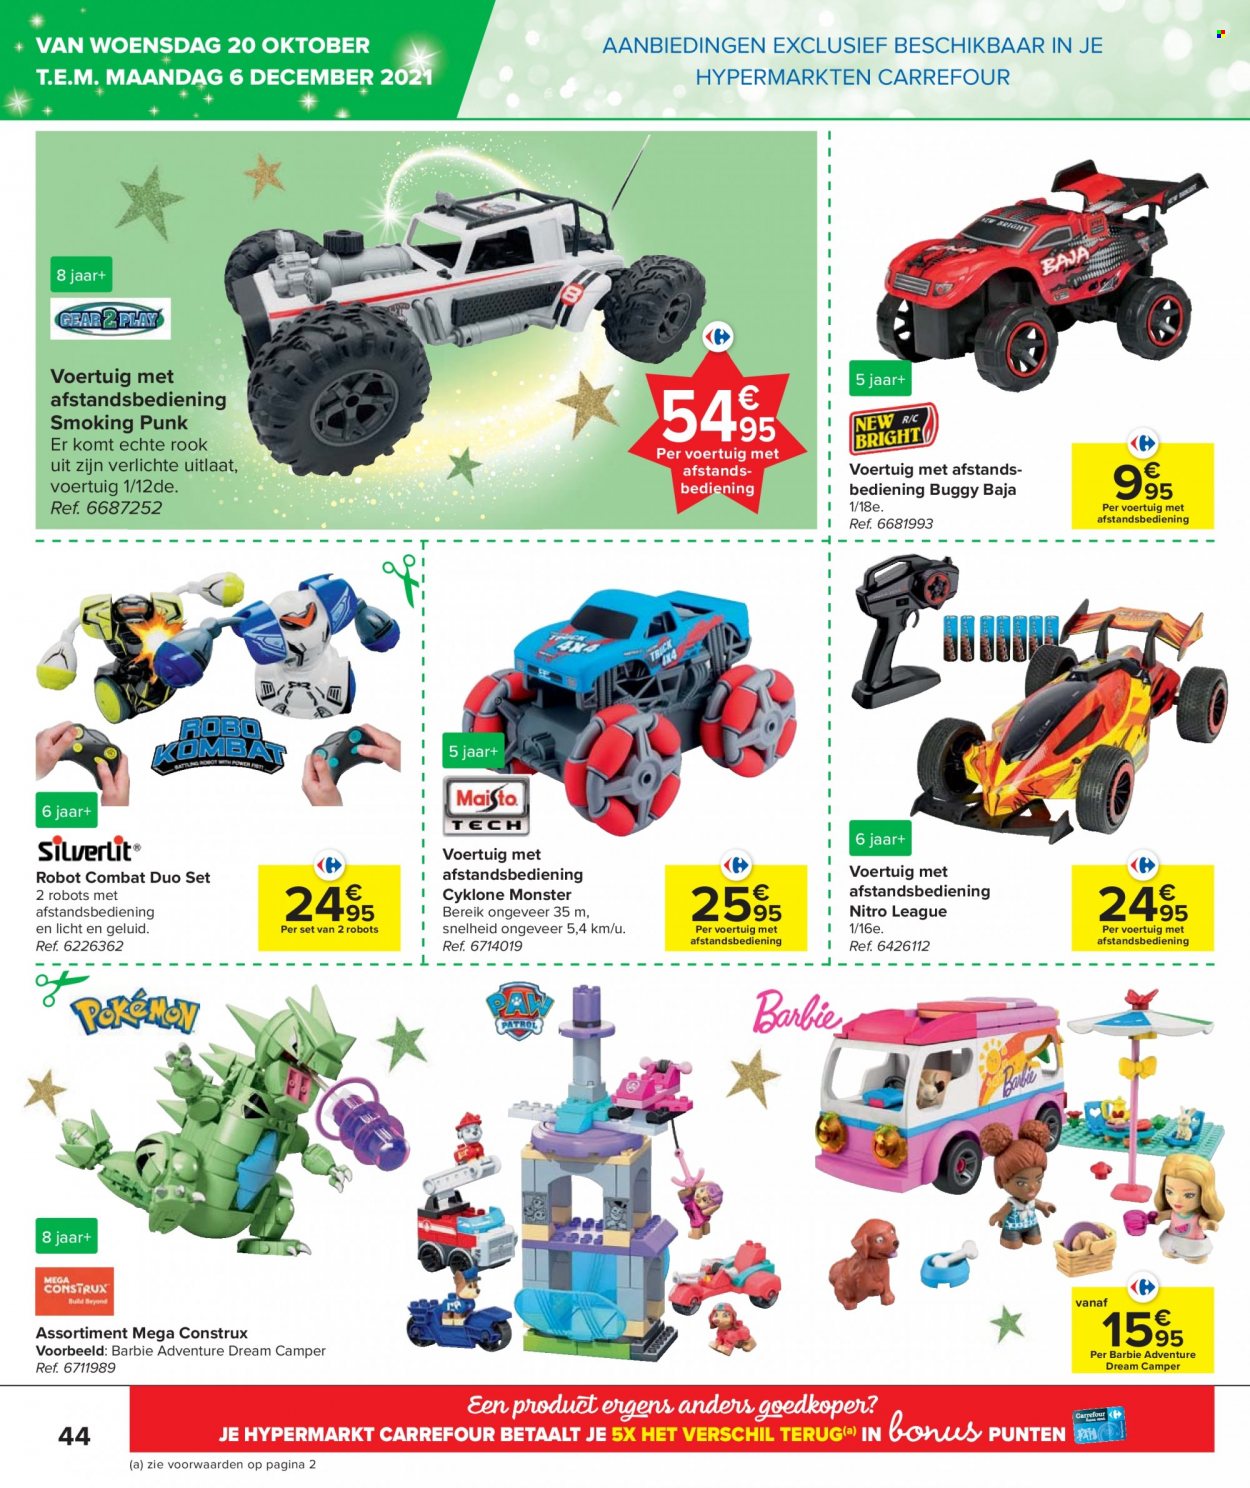 Catalogue Carrefour hypermarkt - 20.10.2021 - 6.12.2021. Page 44.